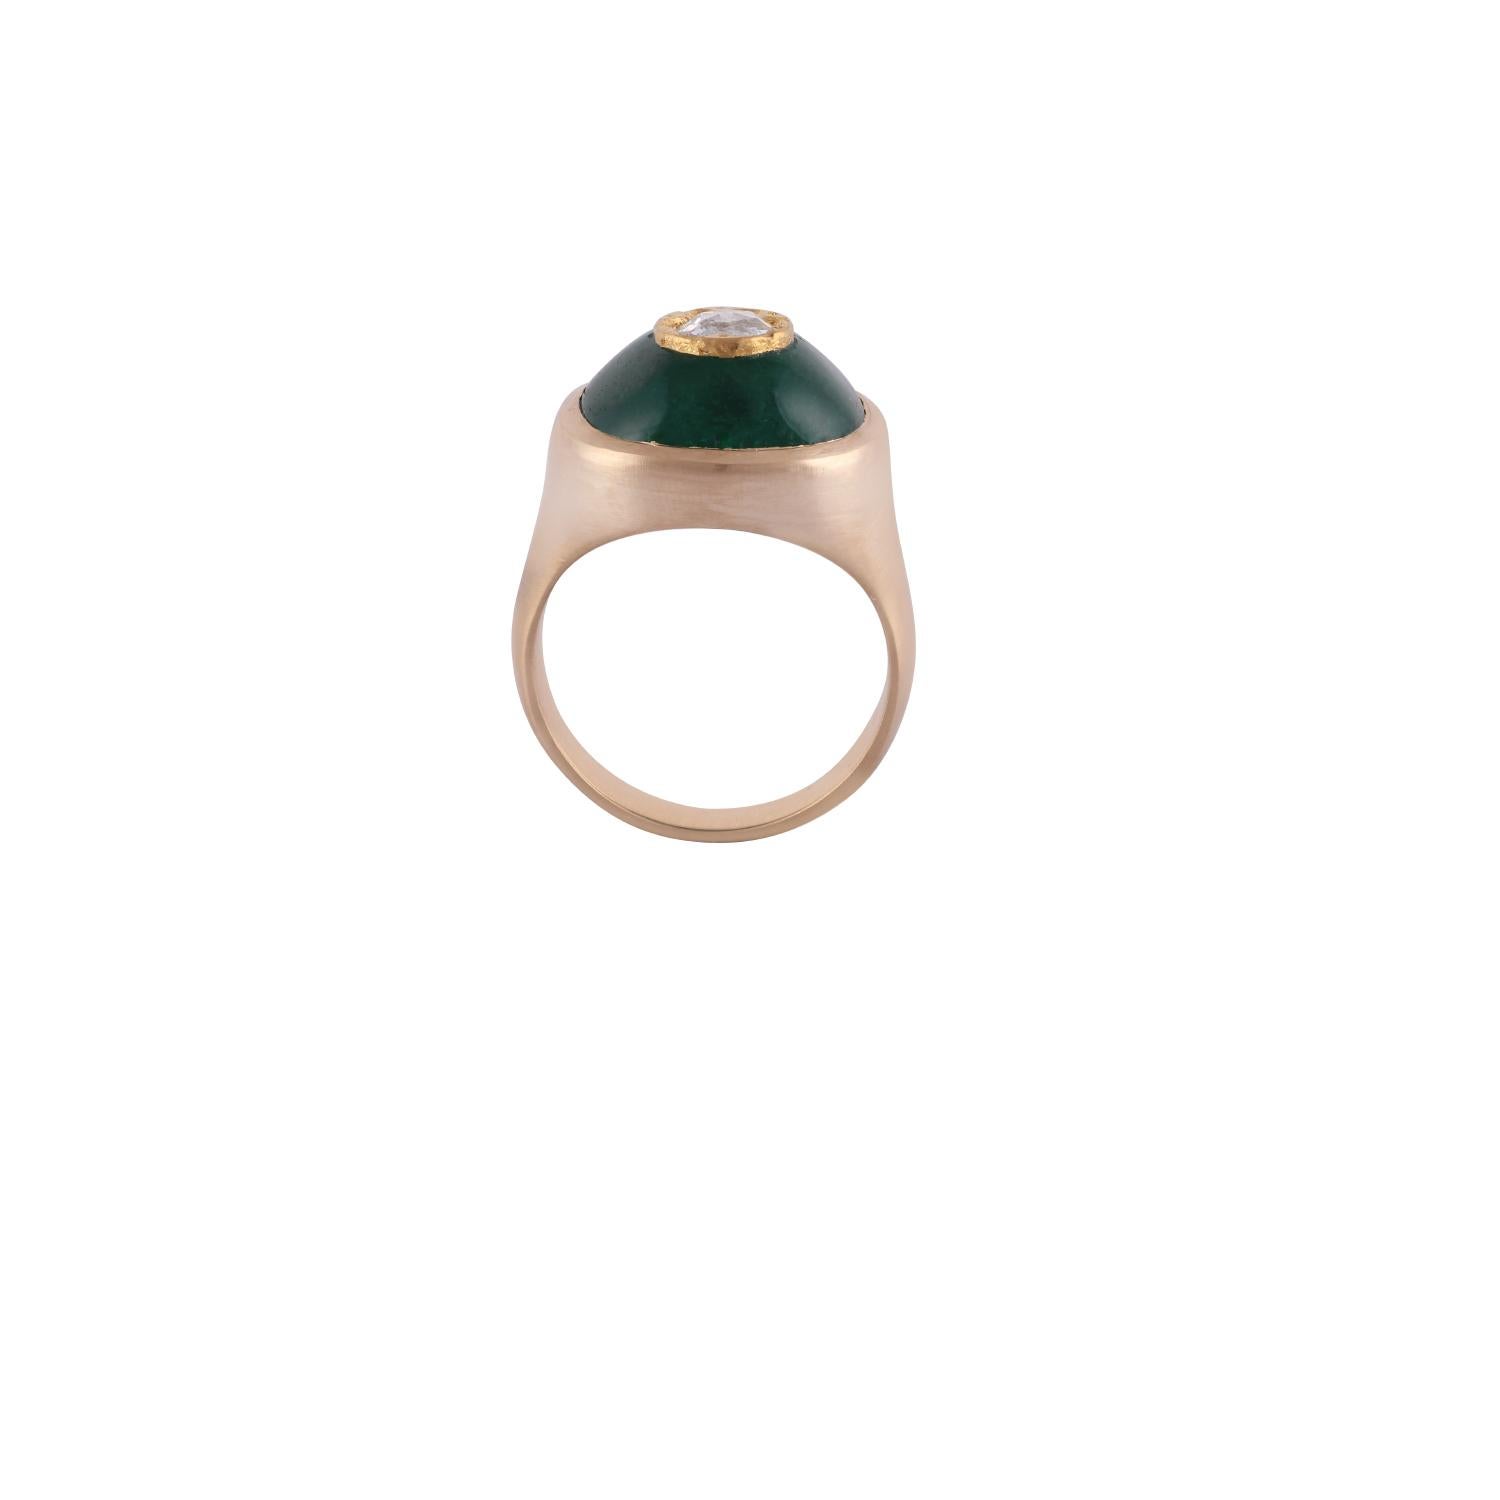 Late Victorian Emerald Cabochon(13.01Carat) Ring with Vintage-Style Diamond Inlaid(0.30Carat)